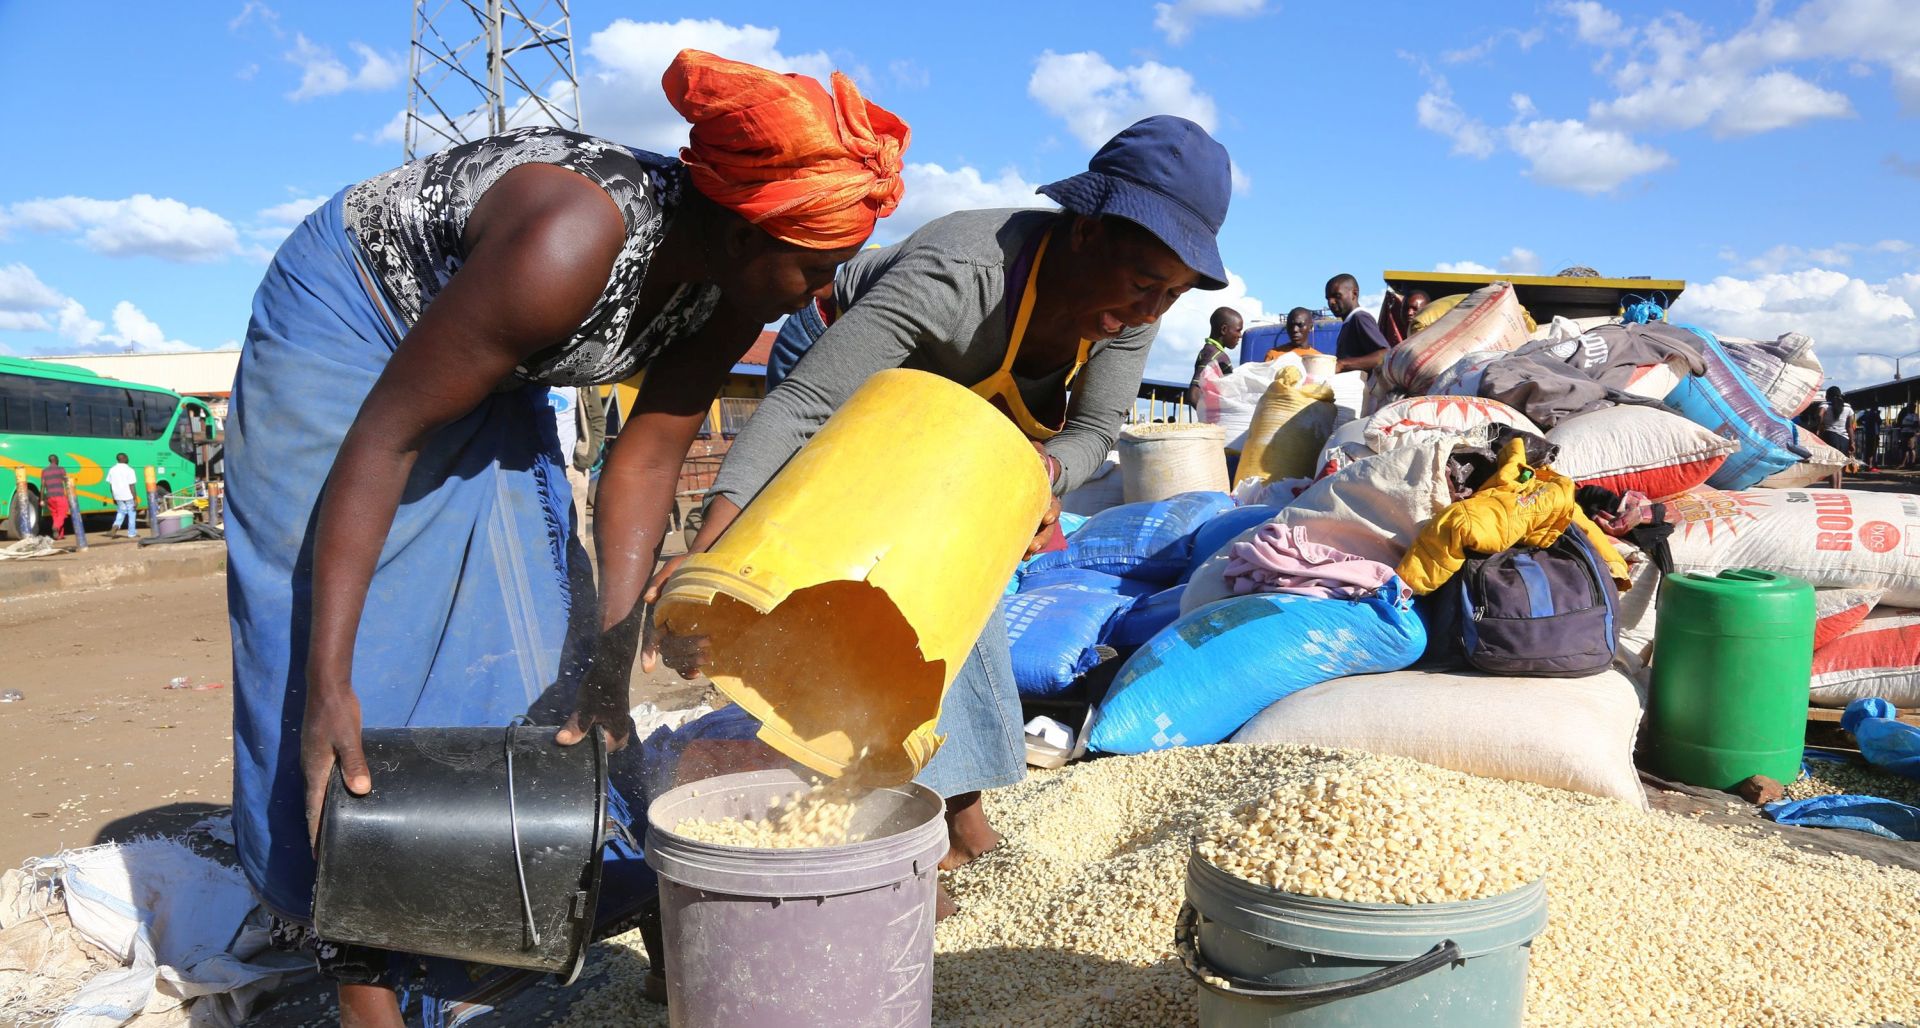 epa05192810 Merchants sell maize which is a commodity imported from Zambia, at the Mbare Musika Bus Terminal, in Harare, Zimbabwe, 03 March 2016. The government has directed the Grain Marketing Board to slash the price of maize from 23 US dollars per 50 kg bag to 15 US dollars to enable the majority of people affected by the El Nino -induced drought, to buy the staple. President Robert Mugabe in February declared a state of disaster as the country faces famine. Zimbabwe requires about 2 million tonnes of maize for livestock and human consuption annually, while the country only harvested about 700,000 tonnes last season. The number of people needing food aid has risen from 1.5 million to 3 million.  EPA/AARON UFUMELI